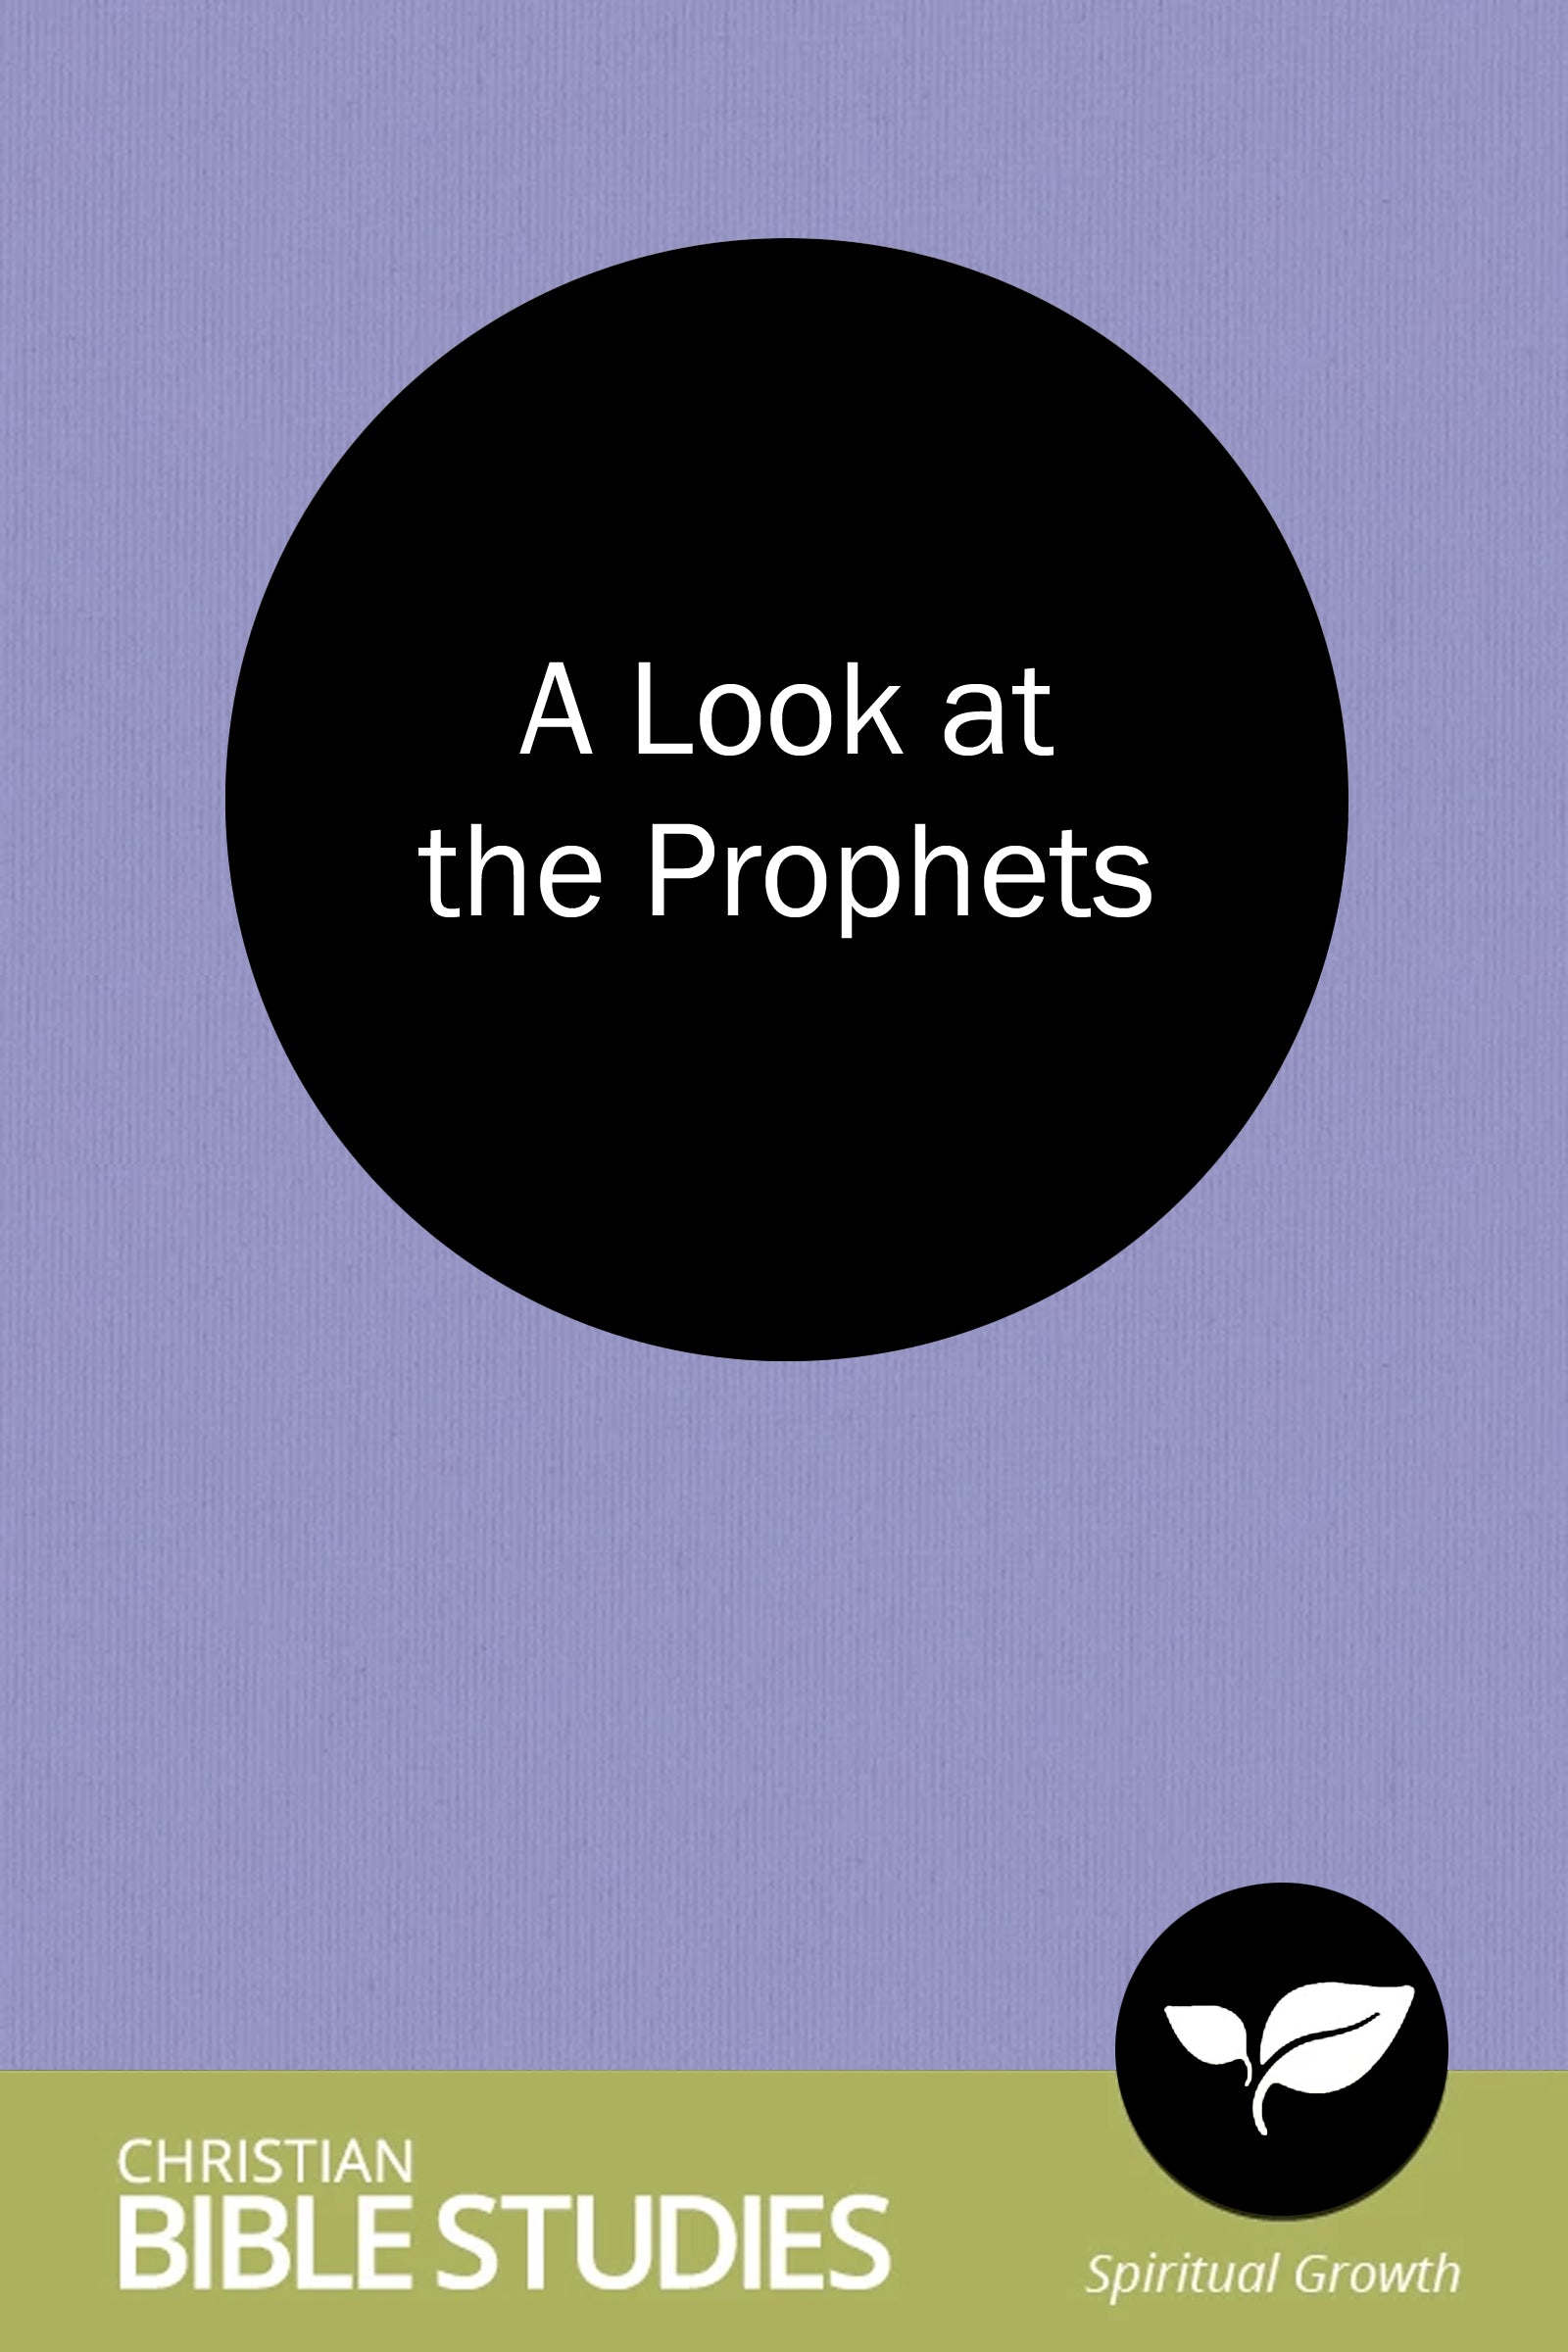 A Look at the Prophets